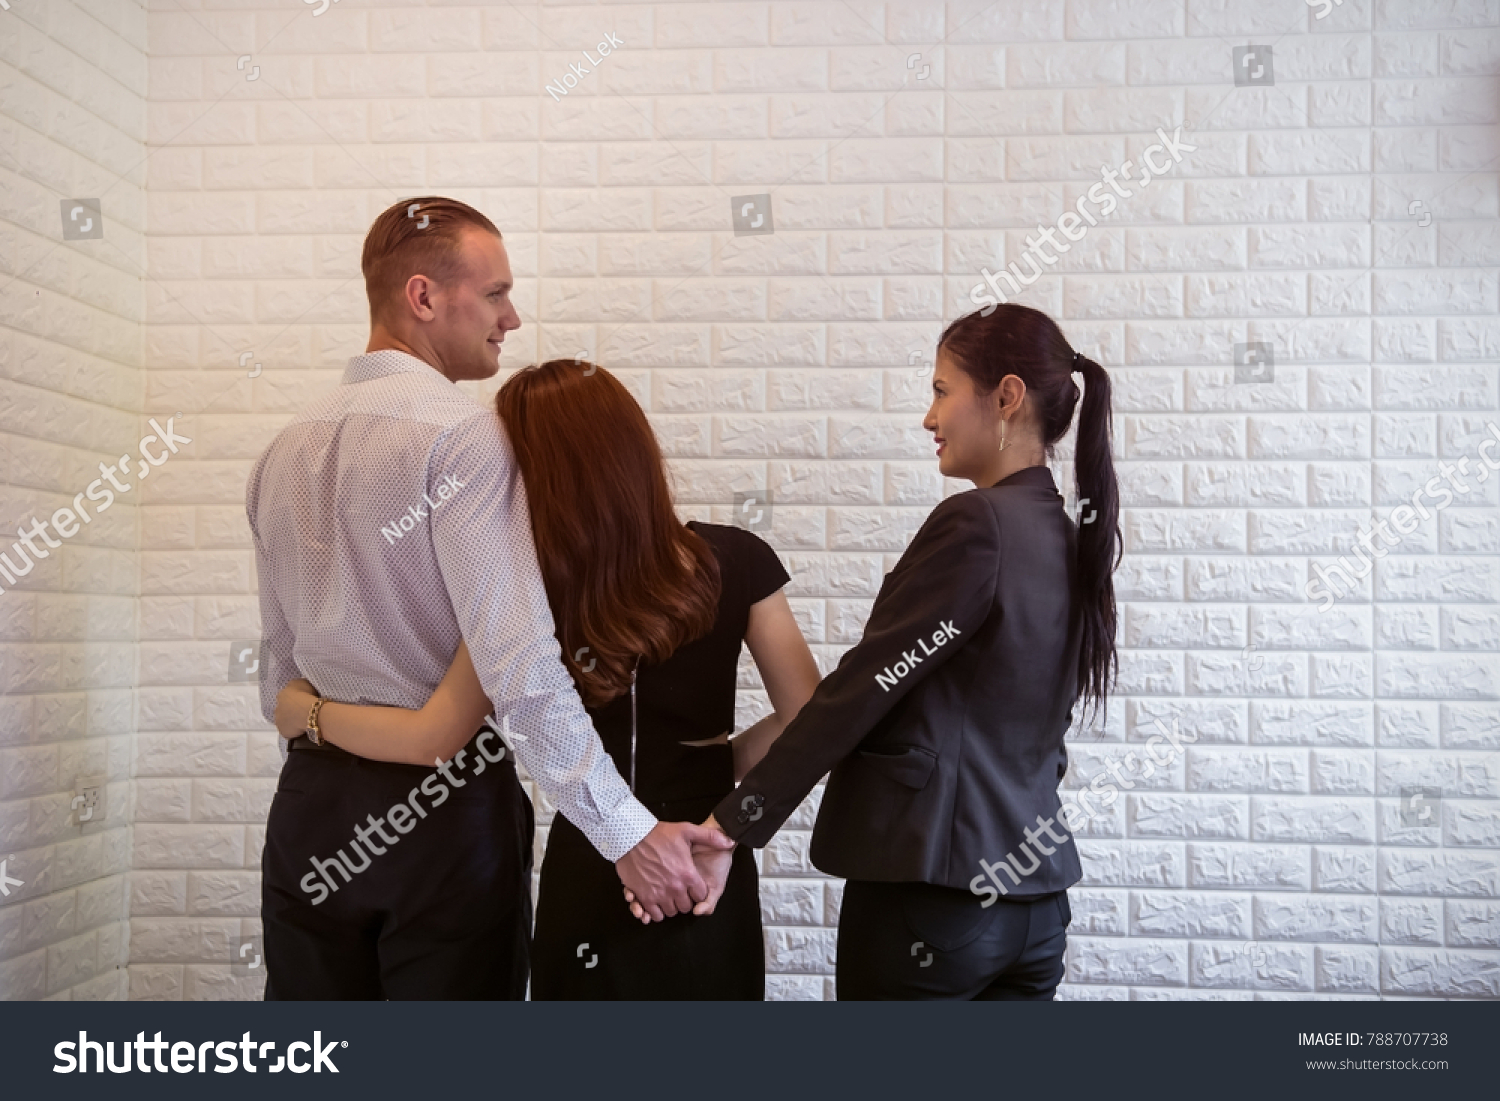 Love triangle cheating man in the office,marital infidelity concept #788707738